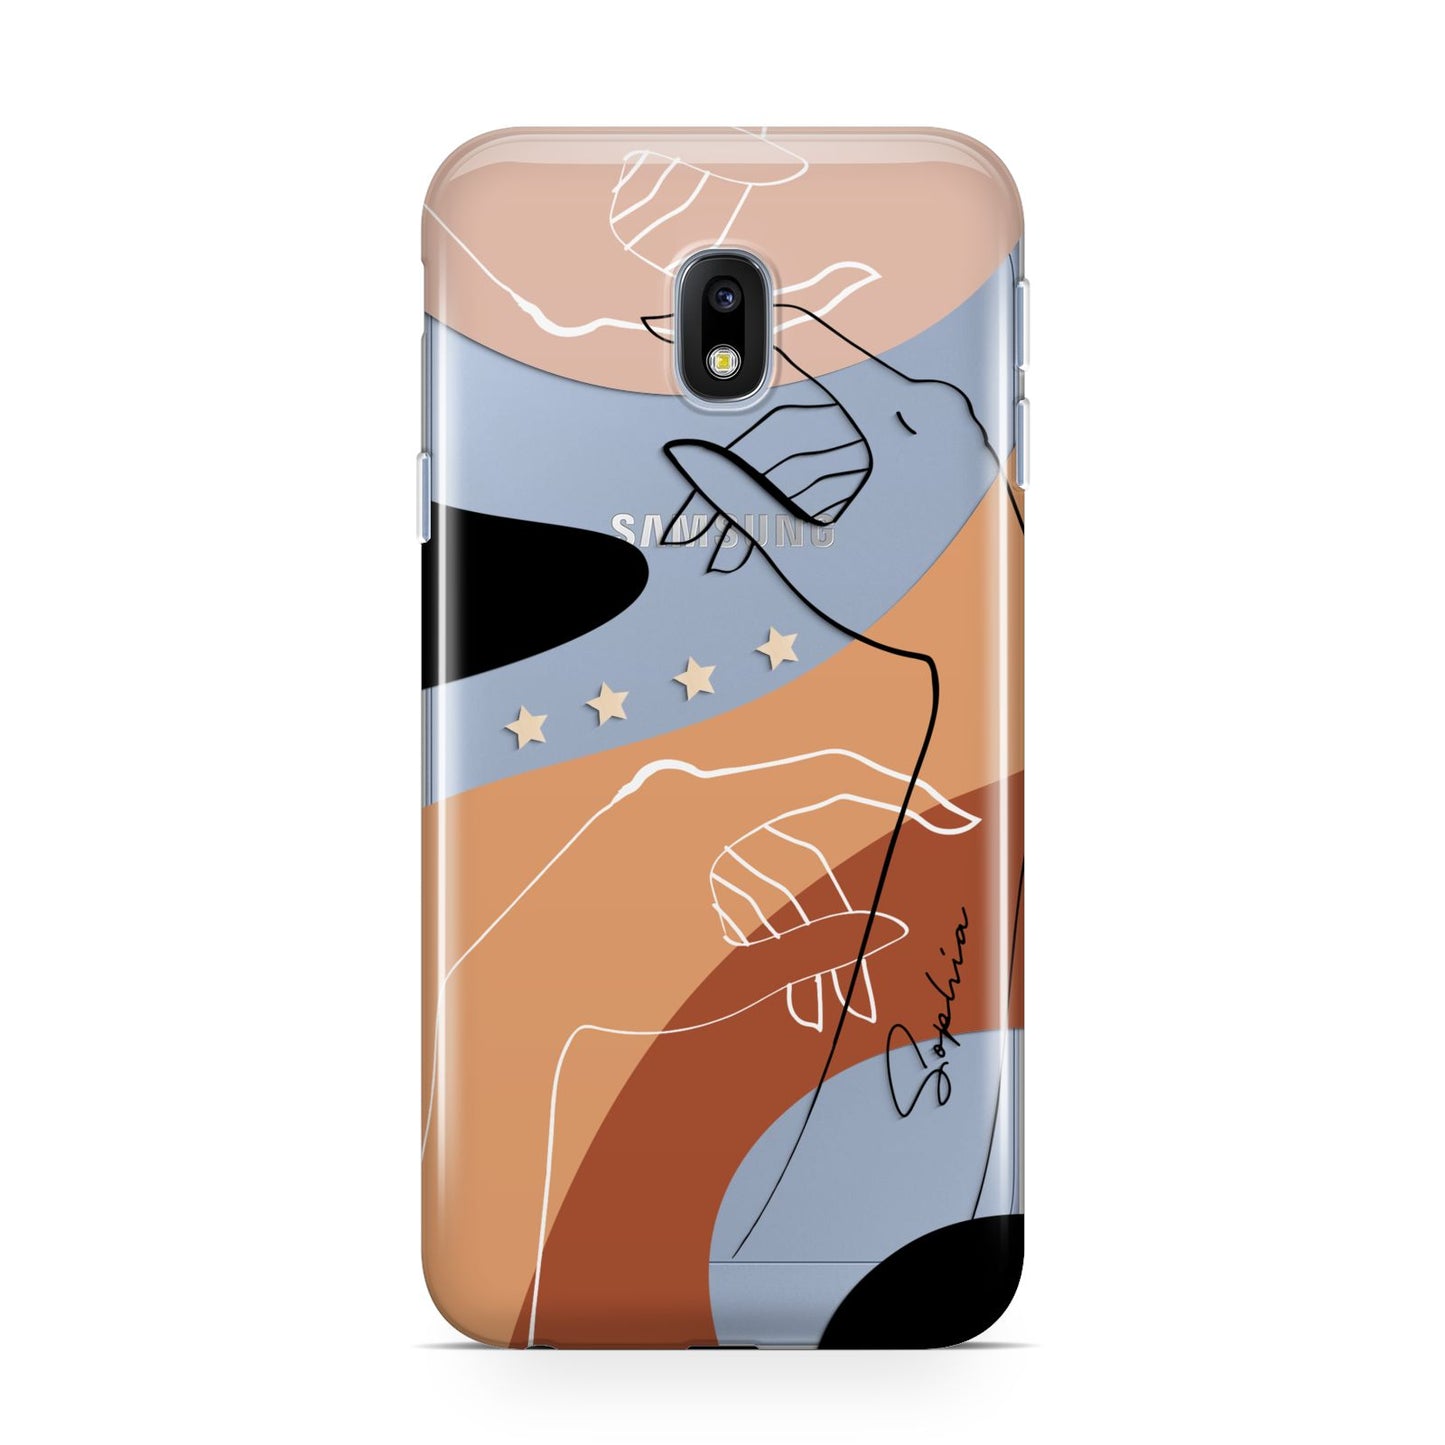 Personalised Abstract Gouache Line Art Samsung Galaxy J3 2017 Case